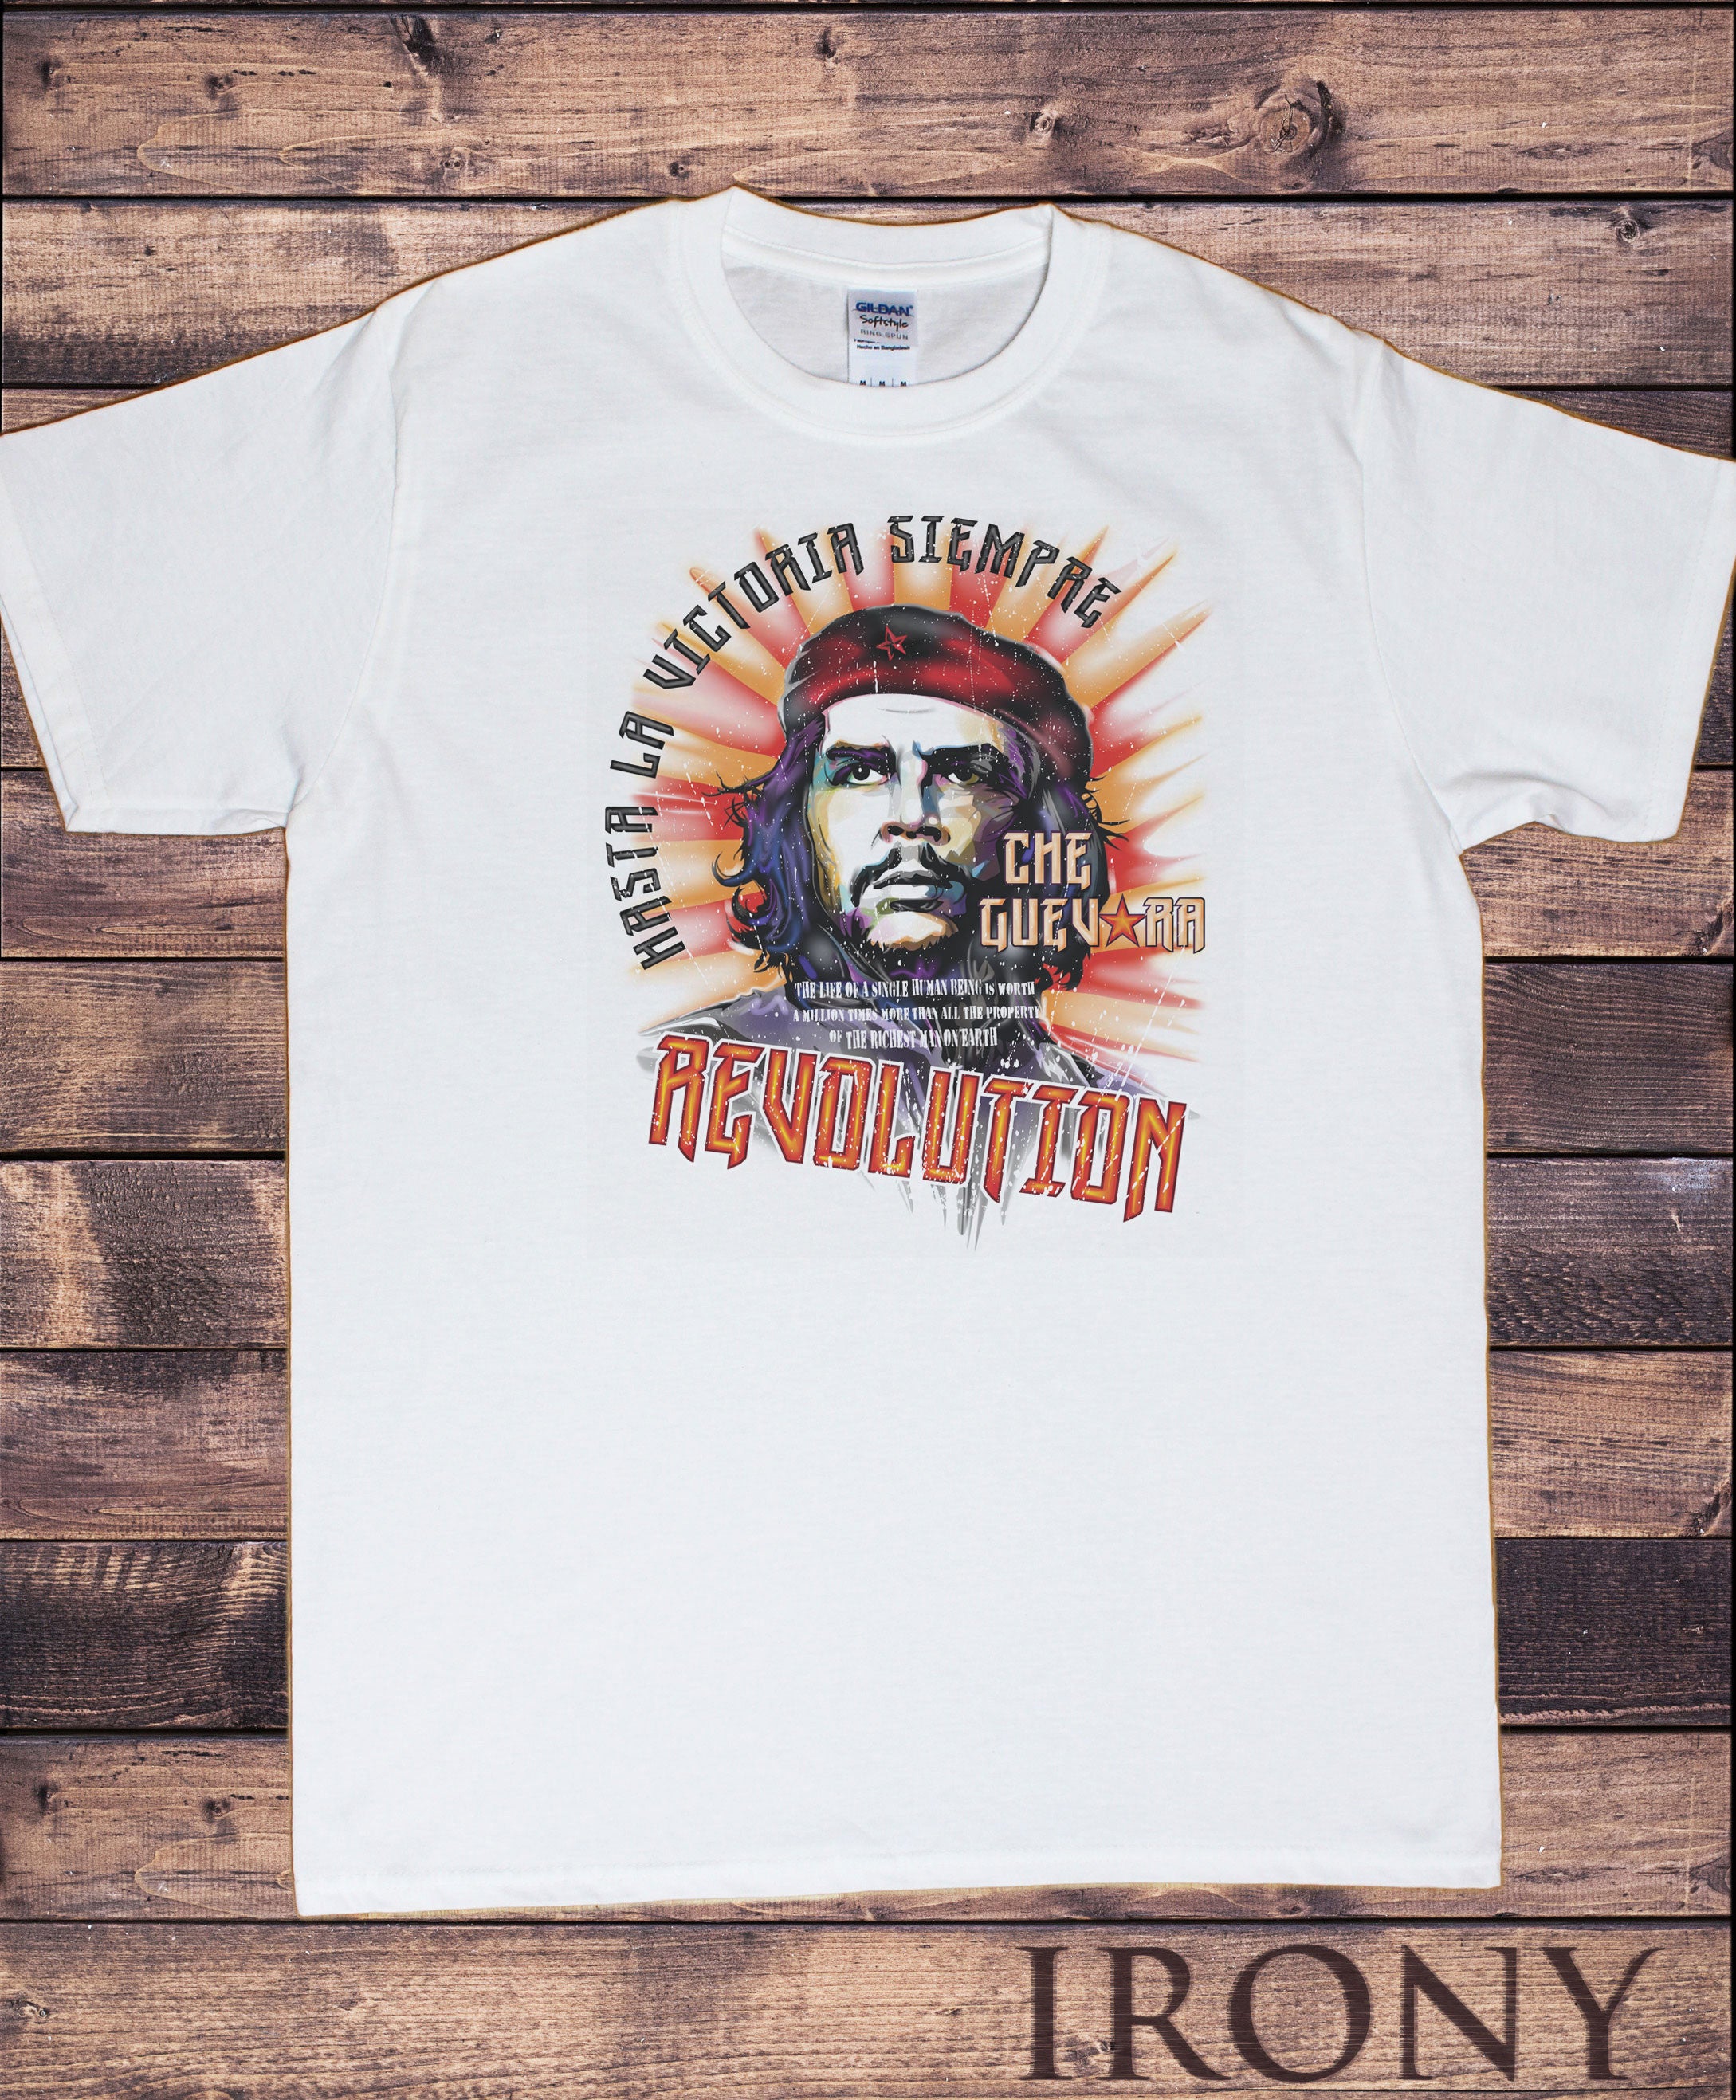 Free Authority T-Shirts : Buy Free Authority Che Guevara Printed White  Tshirt For Men Online